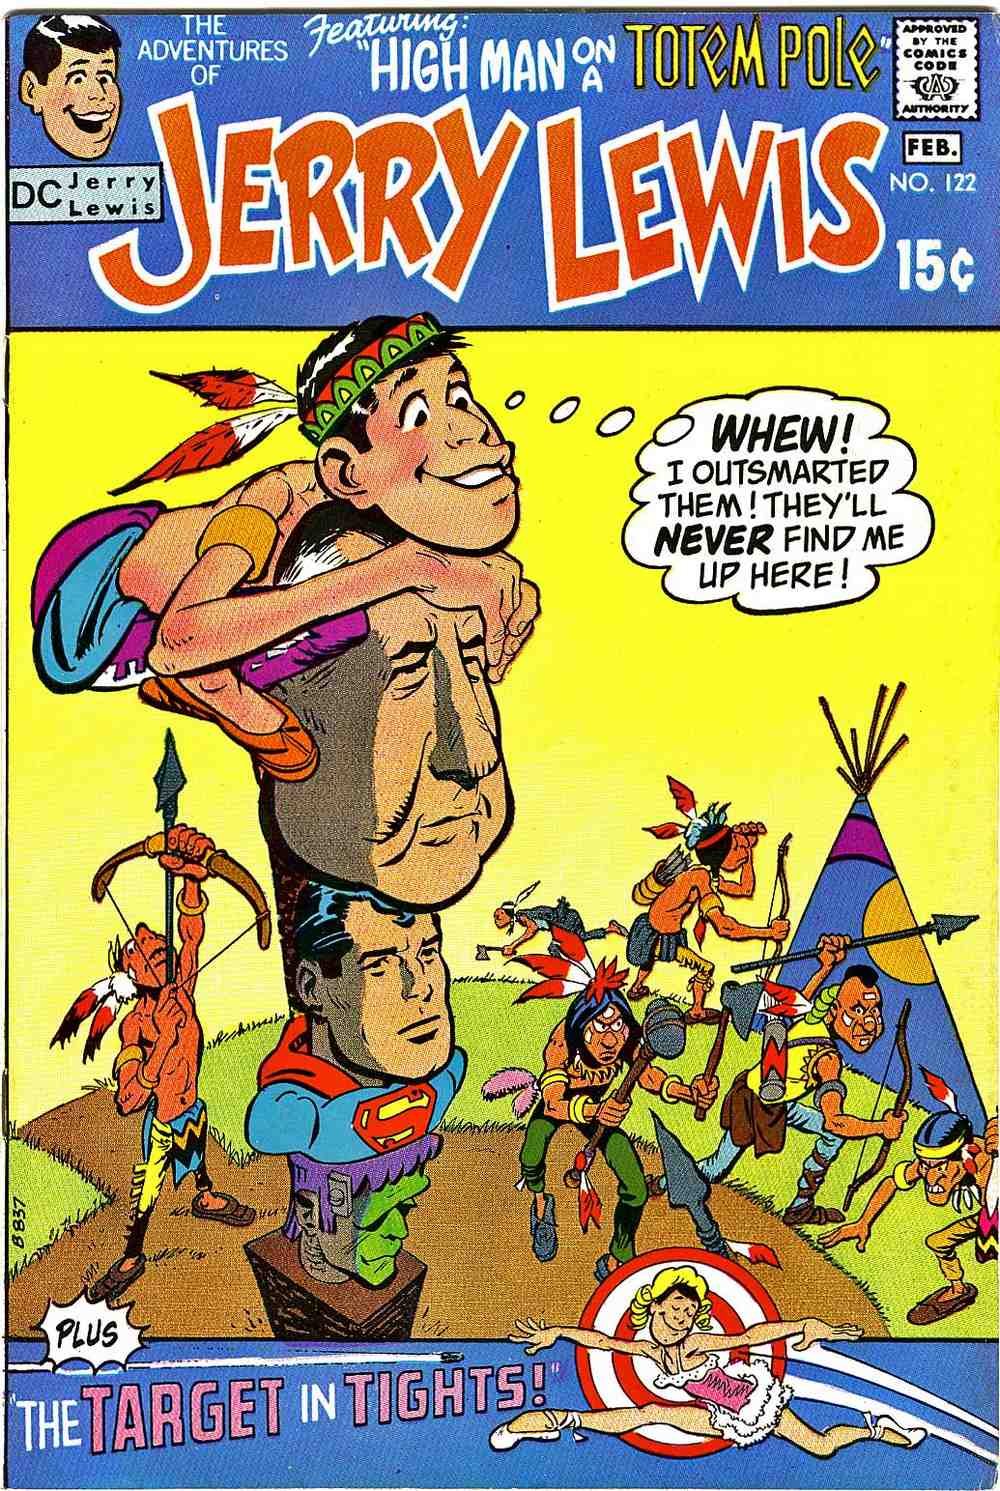 Read online The Adventures of Jerry Lewis comic -  Issue #122 - 1